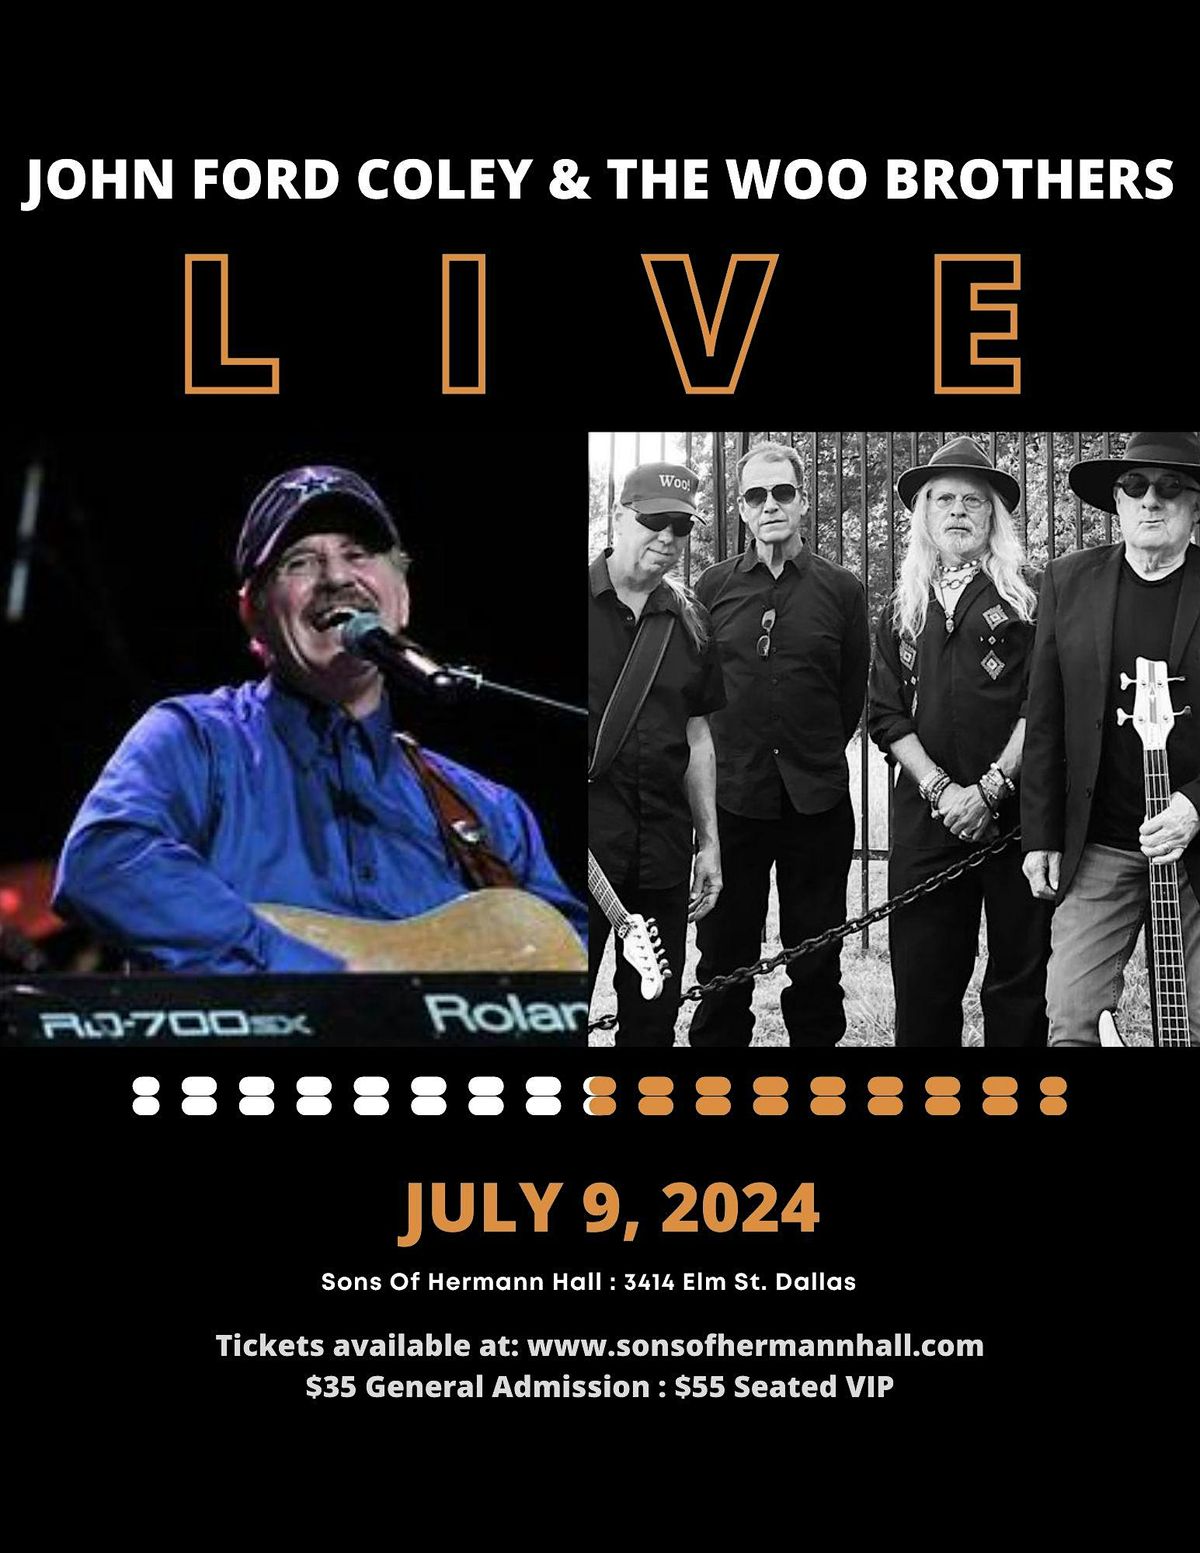 JOHN FORD COLEY & THE WOO BROTHERS LIVE AT SONS OF HERMANN HALL